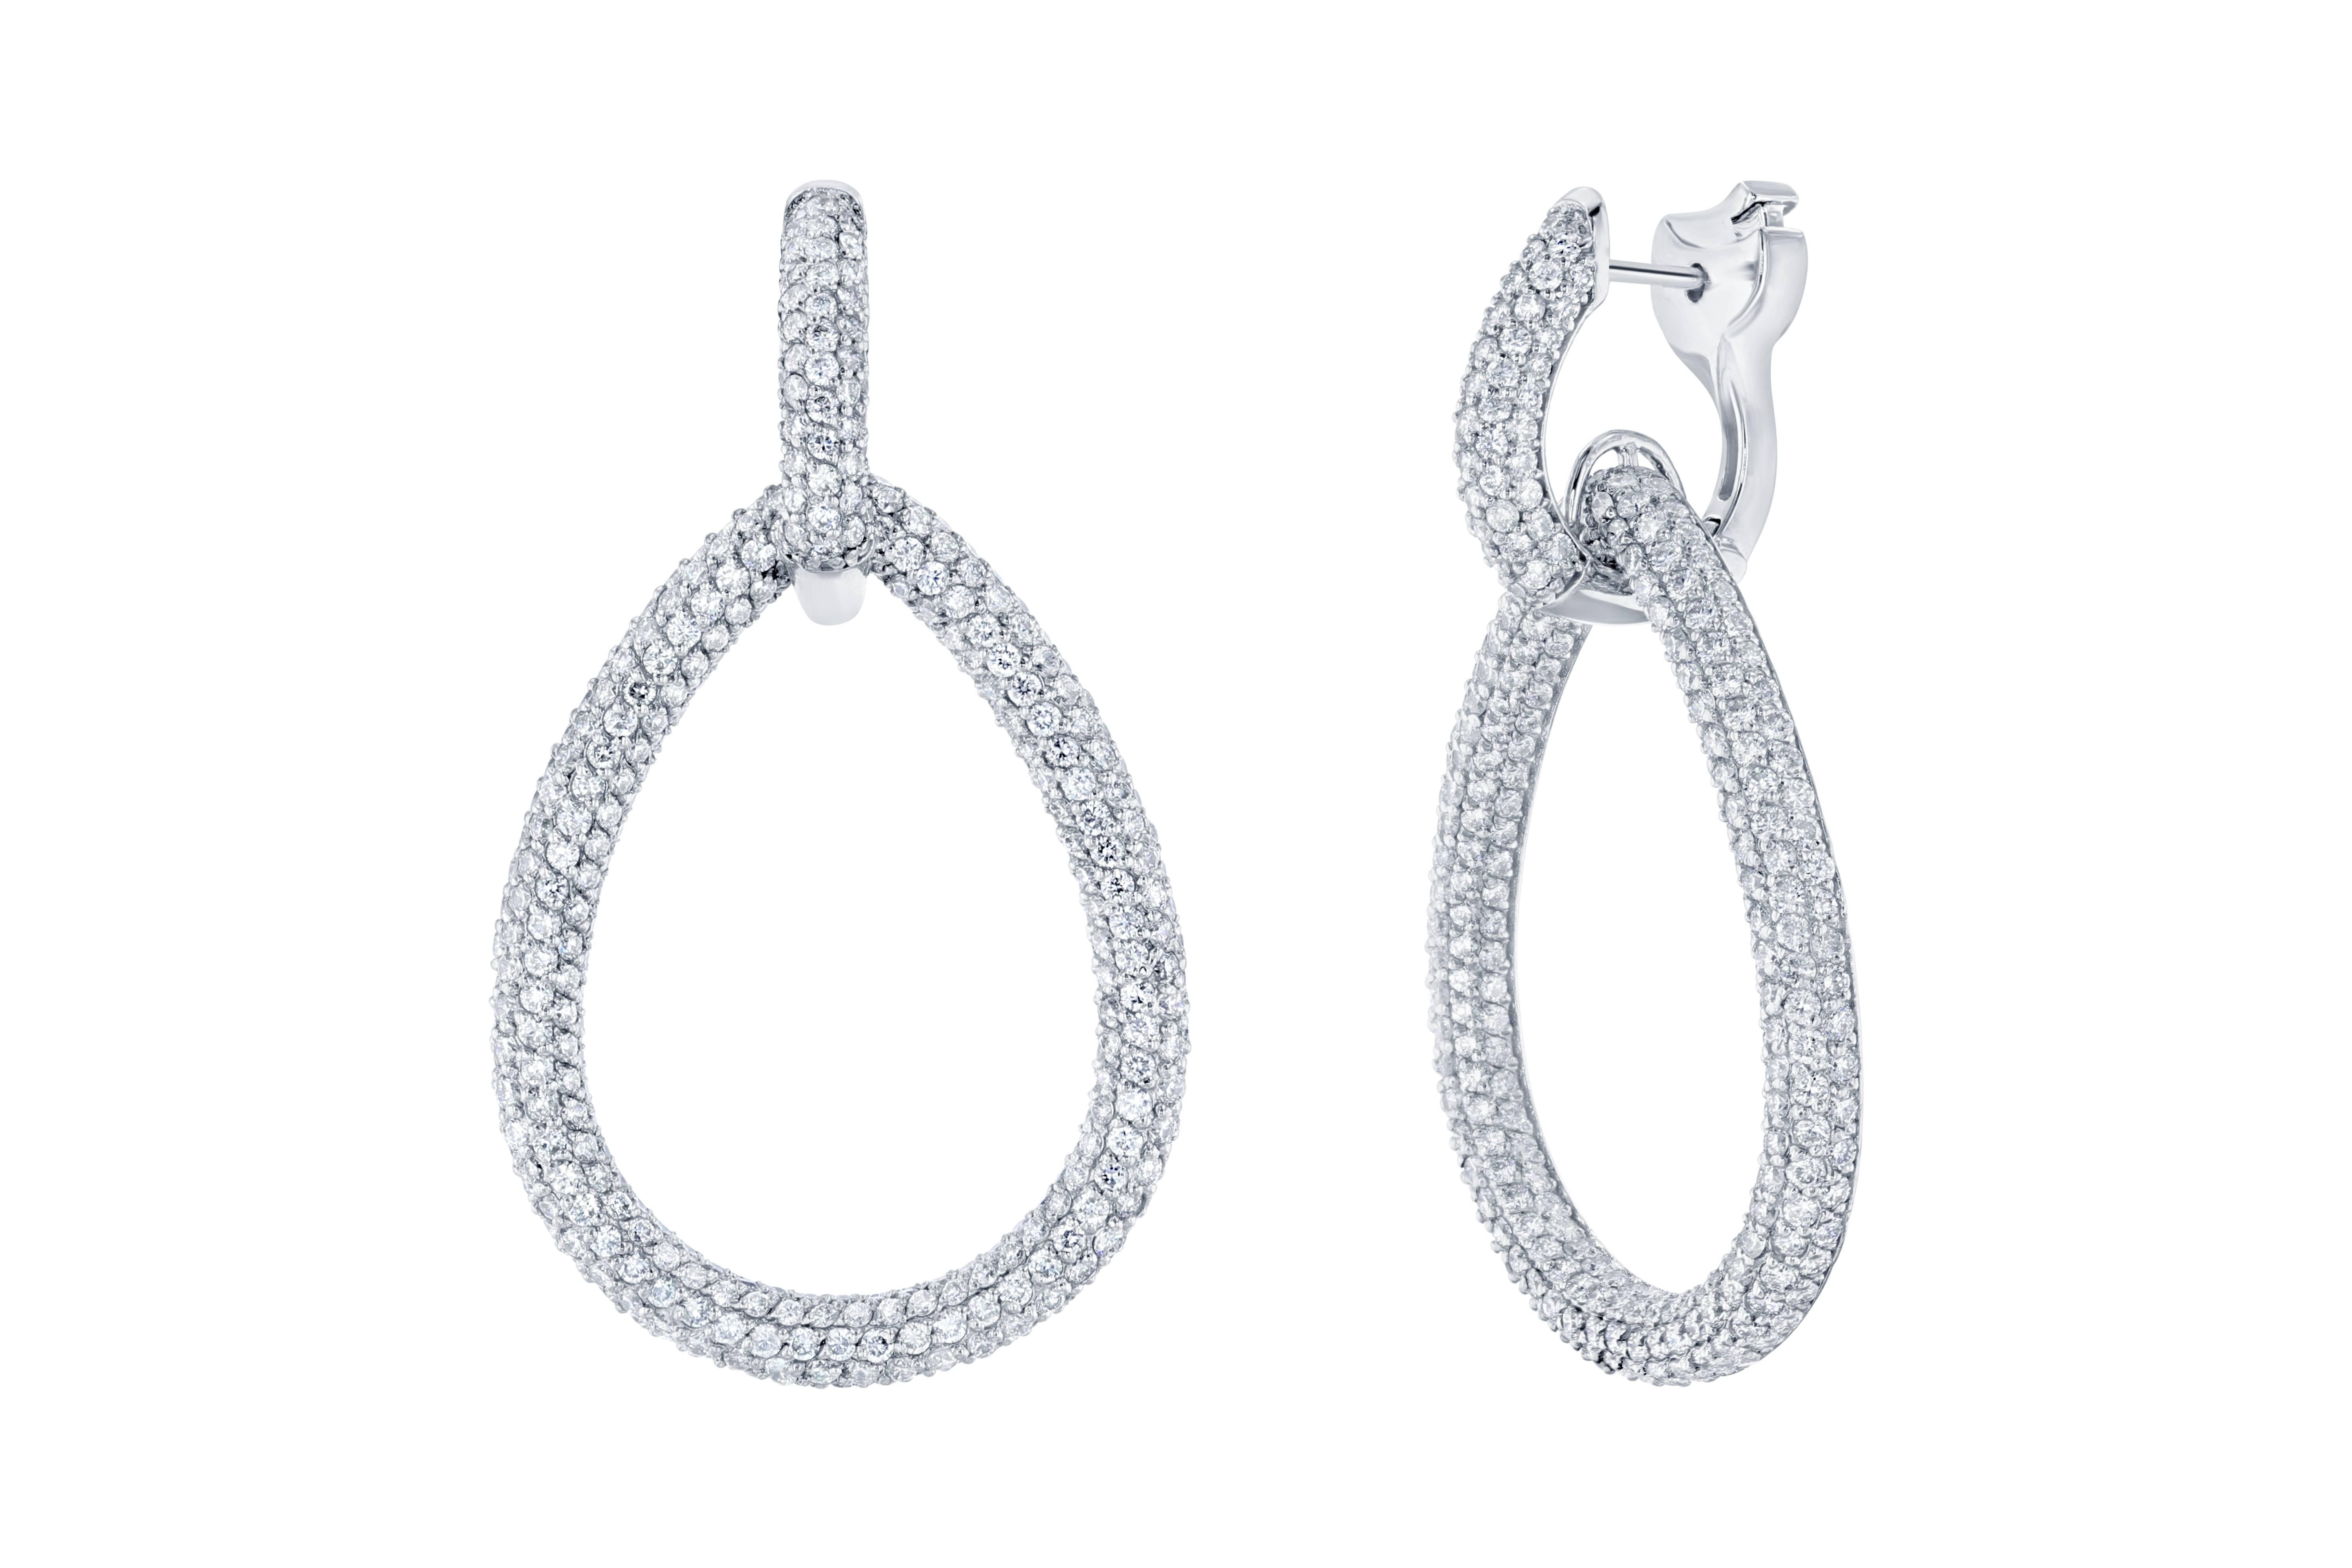 These are some real stunners!  These earrings have 712 Round Cut Diamonds that weigh 7.30 carats (Clarity: VS2, Color: F) and are pave set in a 18K White gold mounting that weighs 18.0 grams.  The earrings are approximately 1.80 inches long.   The